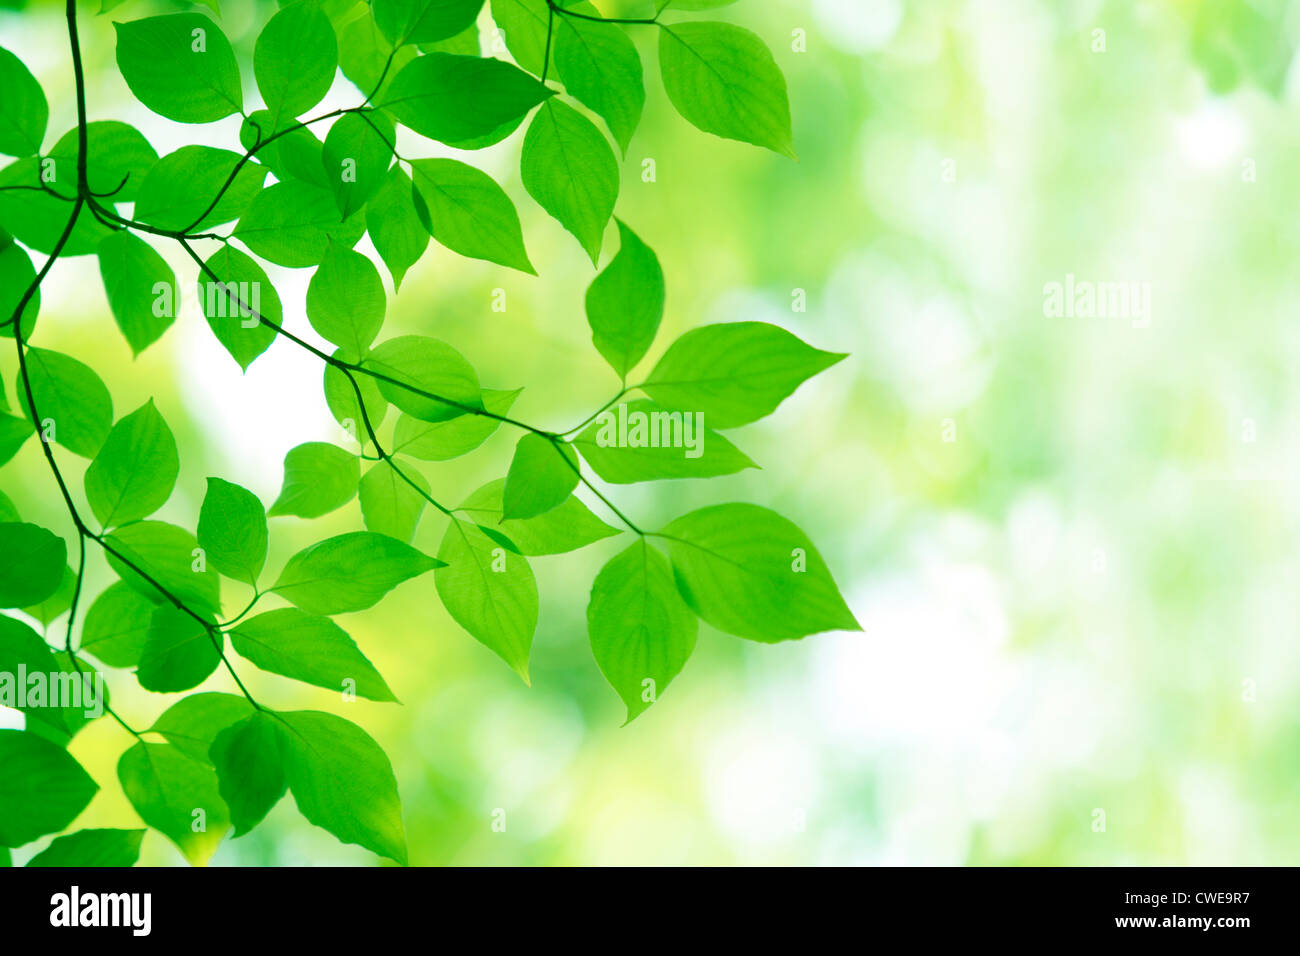 Bright Green Leaves With Blur Background Stock Photo - Alamy